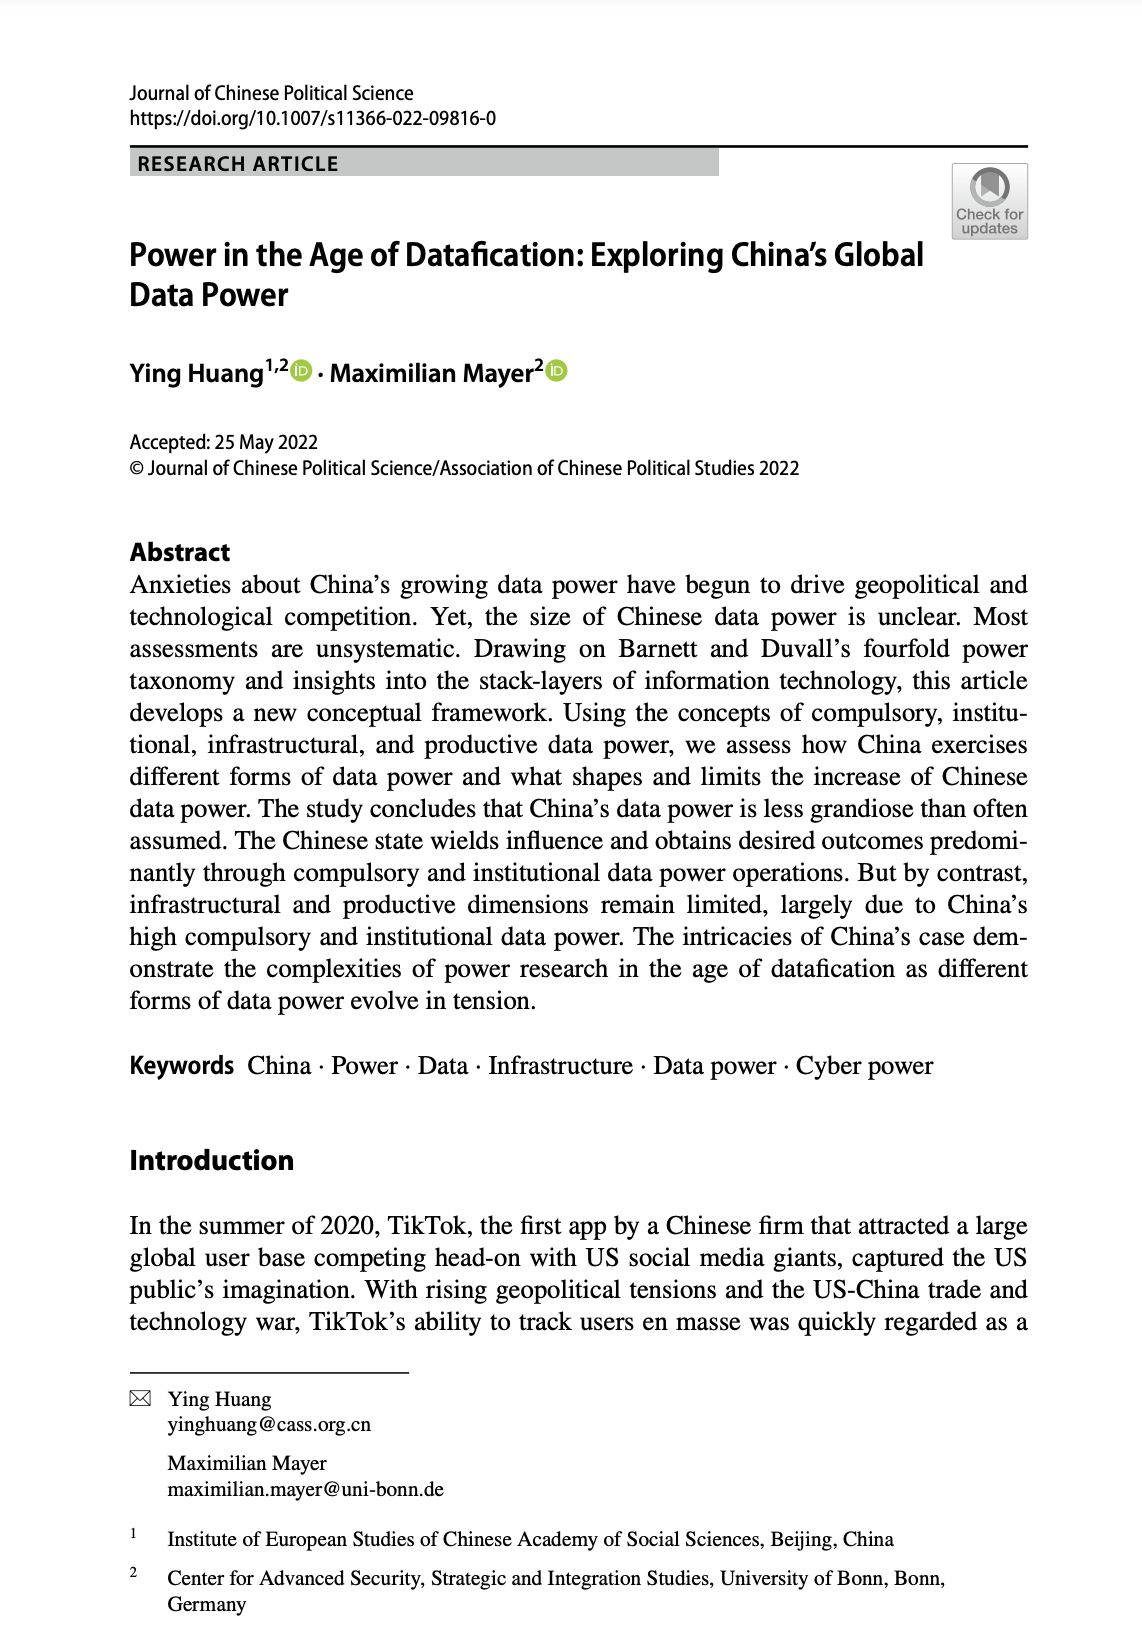 Power in the Age of Datafication: Exploring China’s Global Data Power